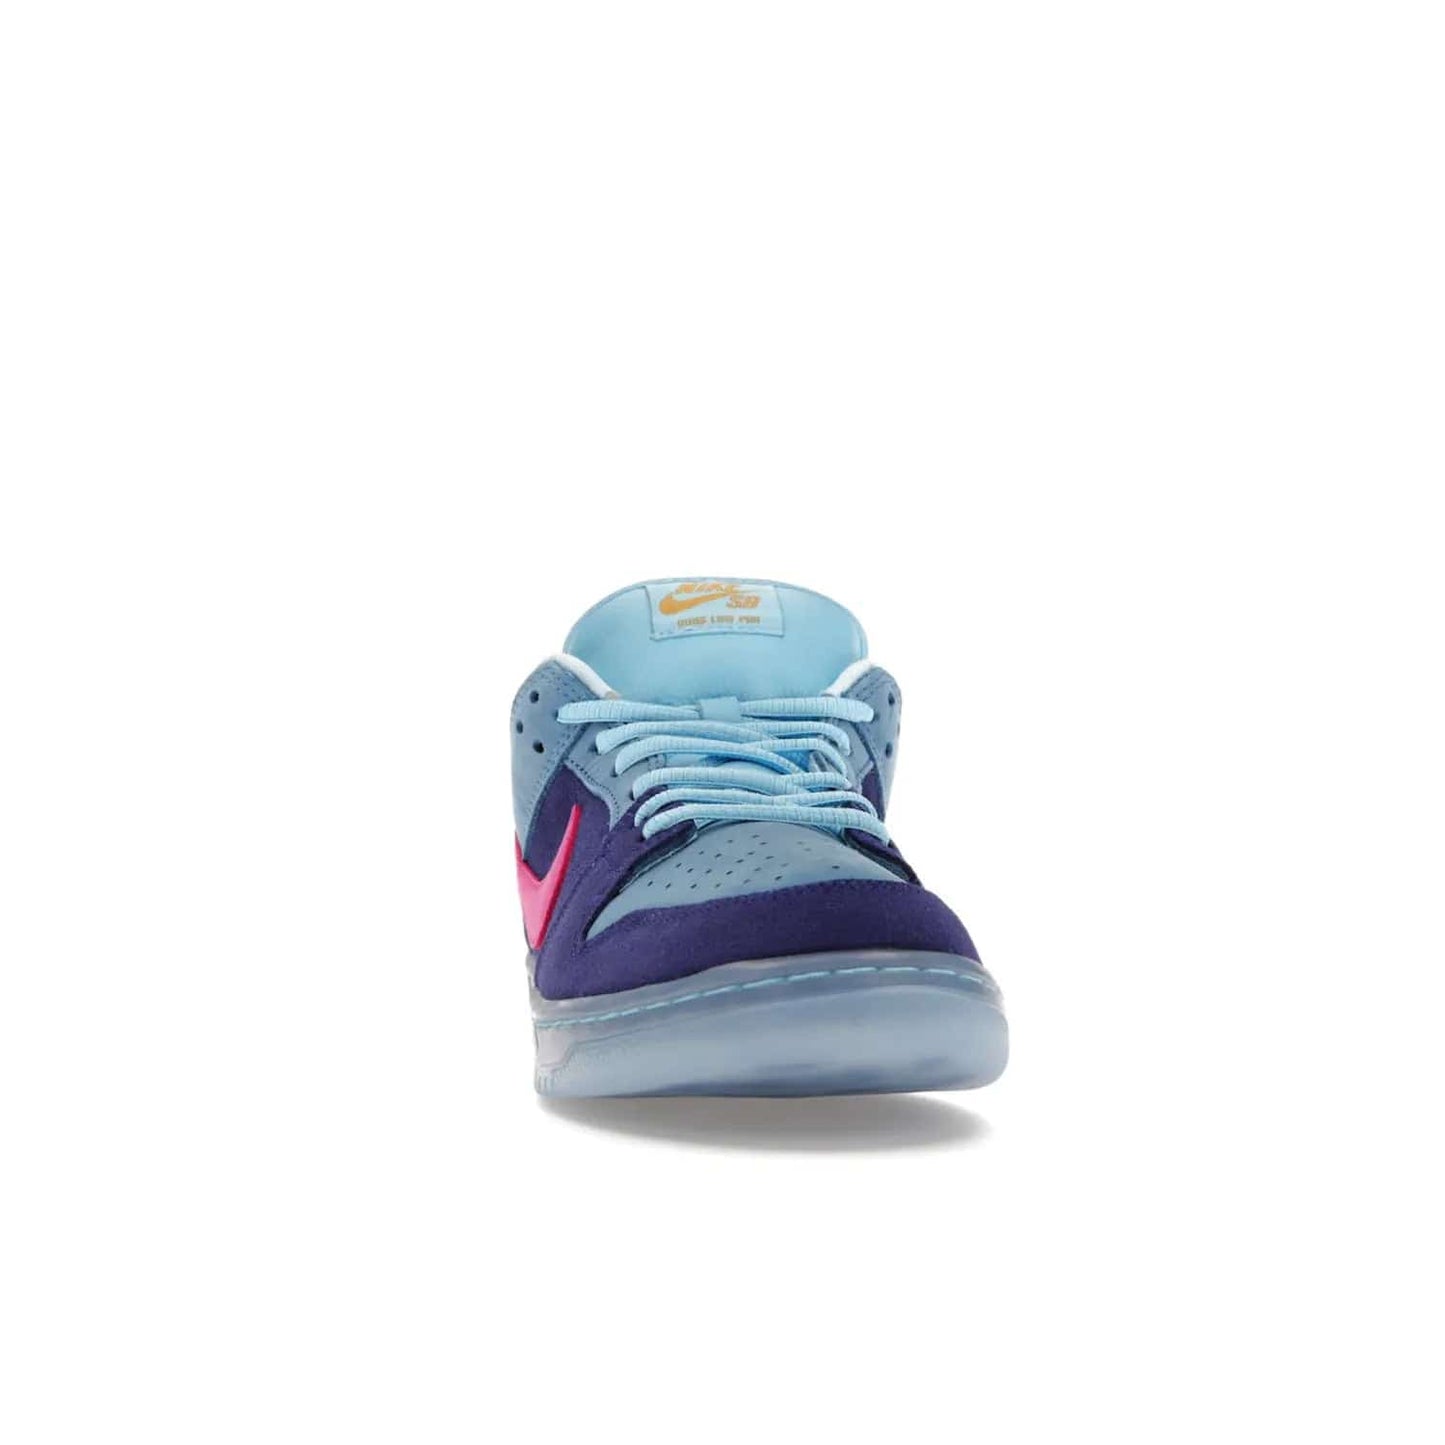 Nike SB Dunk Low Run The Jewels - Image 9 - Only at www.BallersClubKickz.com - The Nike SB Dunk Low Run The Jewels pays tribute to the Run the Jewels 3 album cover. It features a blue suede upper with pink suede accents, gold branding and 3 lace sets. RTJ insoles complete this limited edition sneaker. Get it now for your shoe collection.